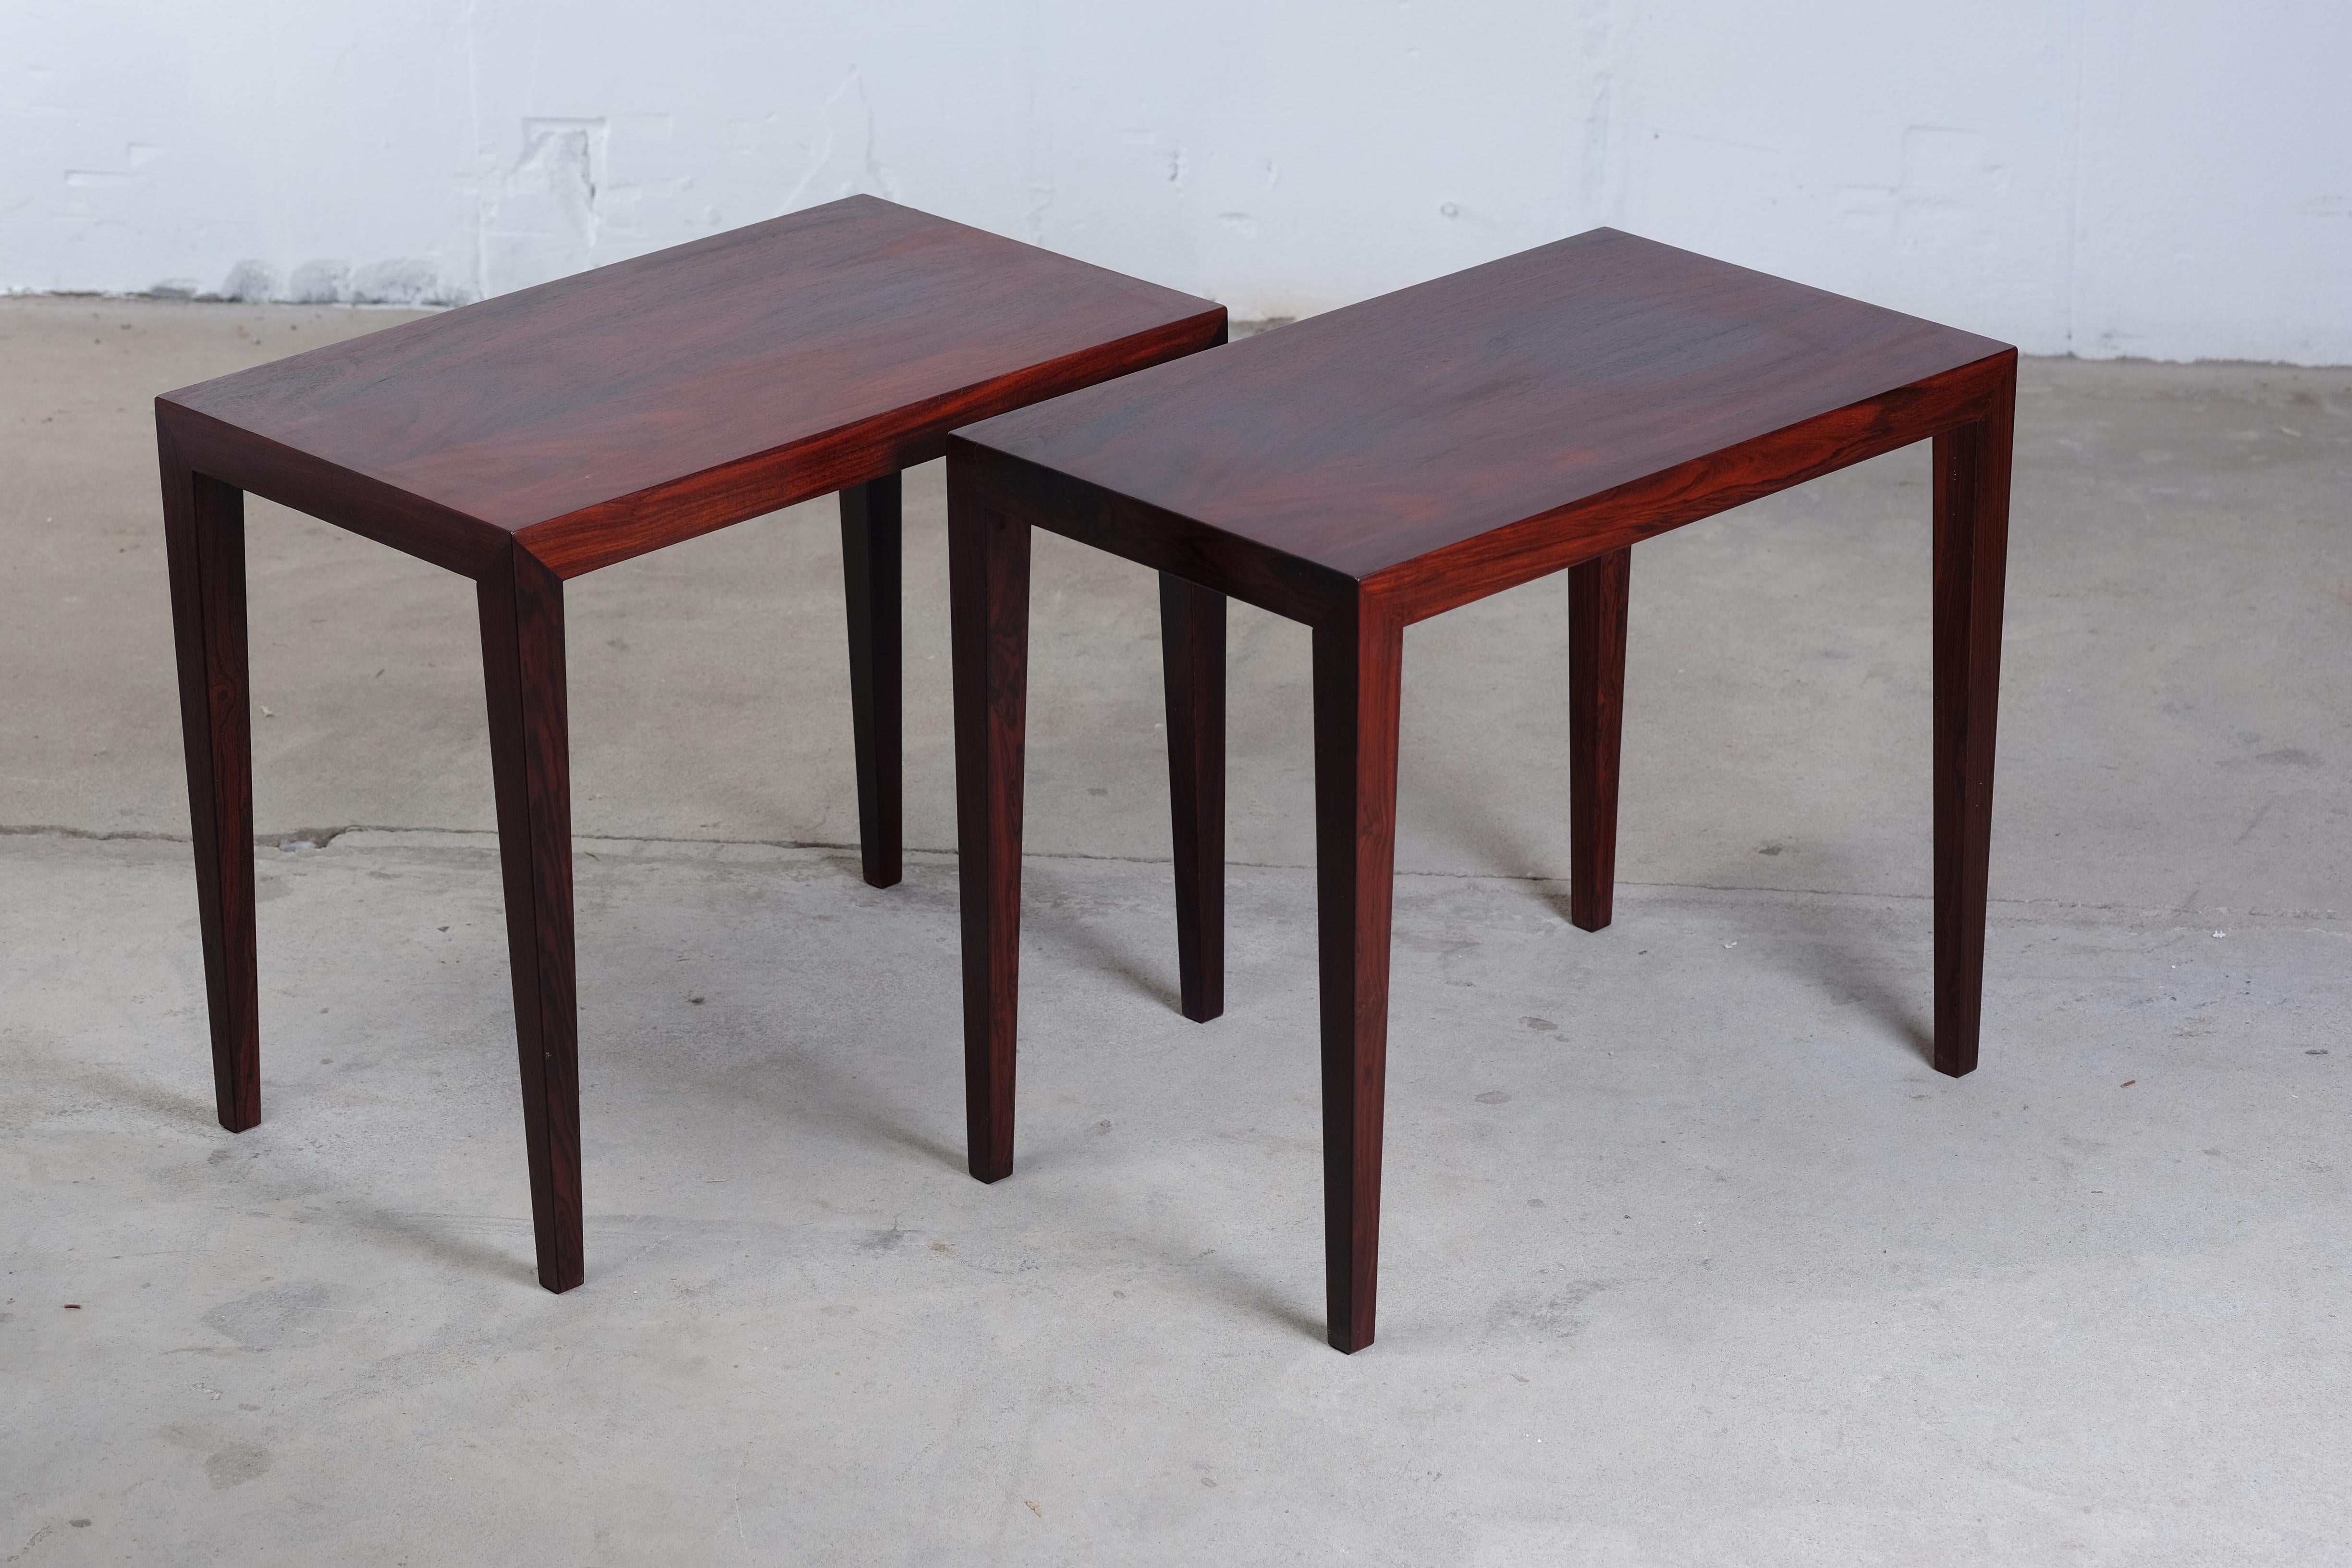 Stunning pair of rosewood side tables designed by Severin Hansen - Produced by Haslev Møbelfabrik, circa 1968. The tables are very light and elegant with the tall tapering legs which join the top with a signature triangle join between the leg and